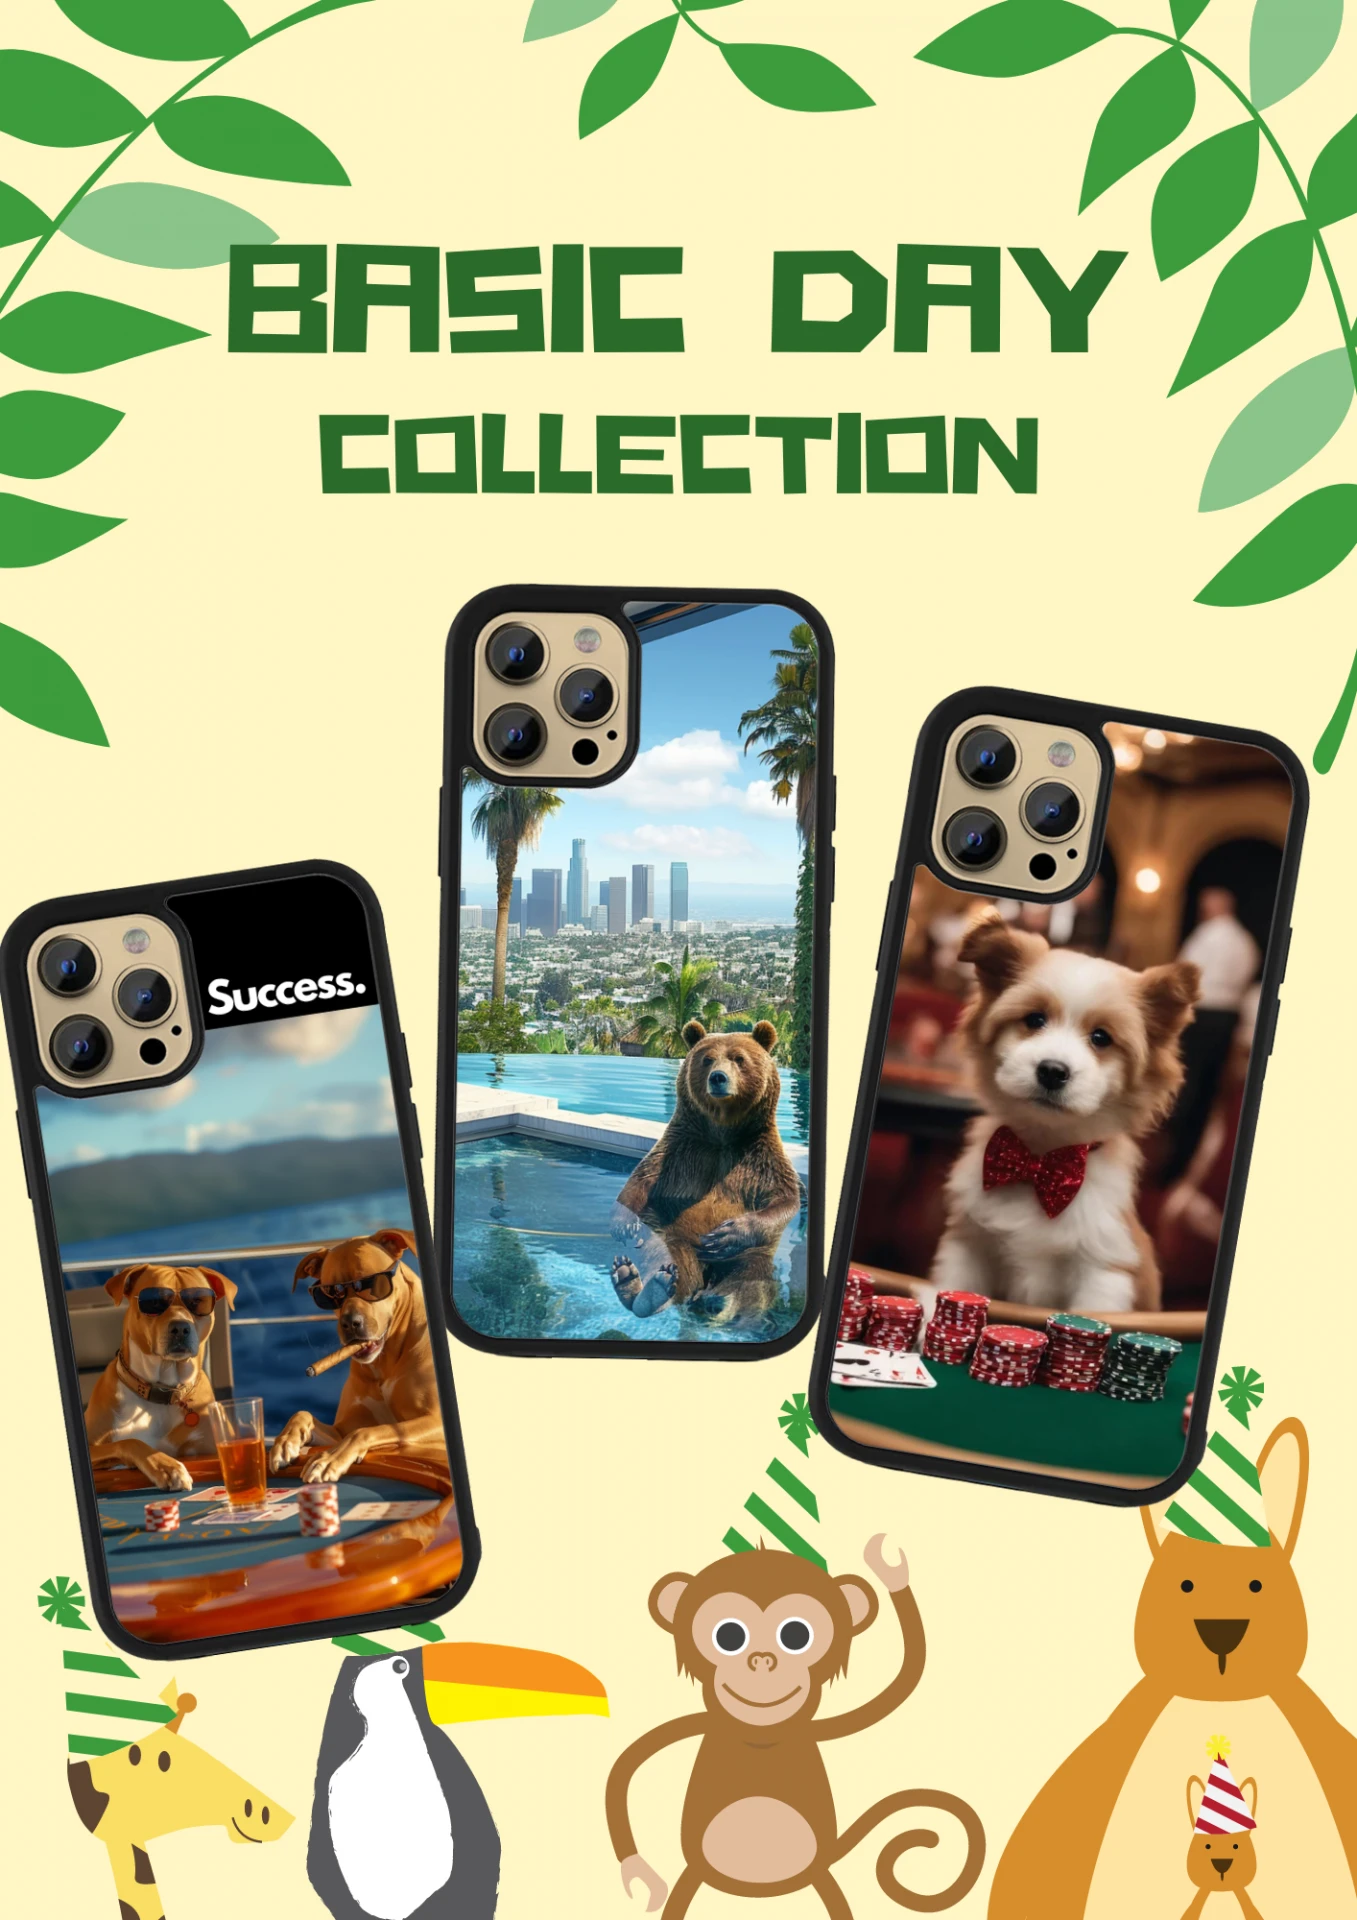 Basic Day collection